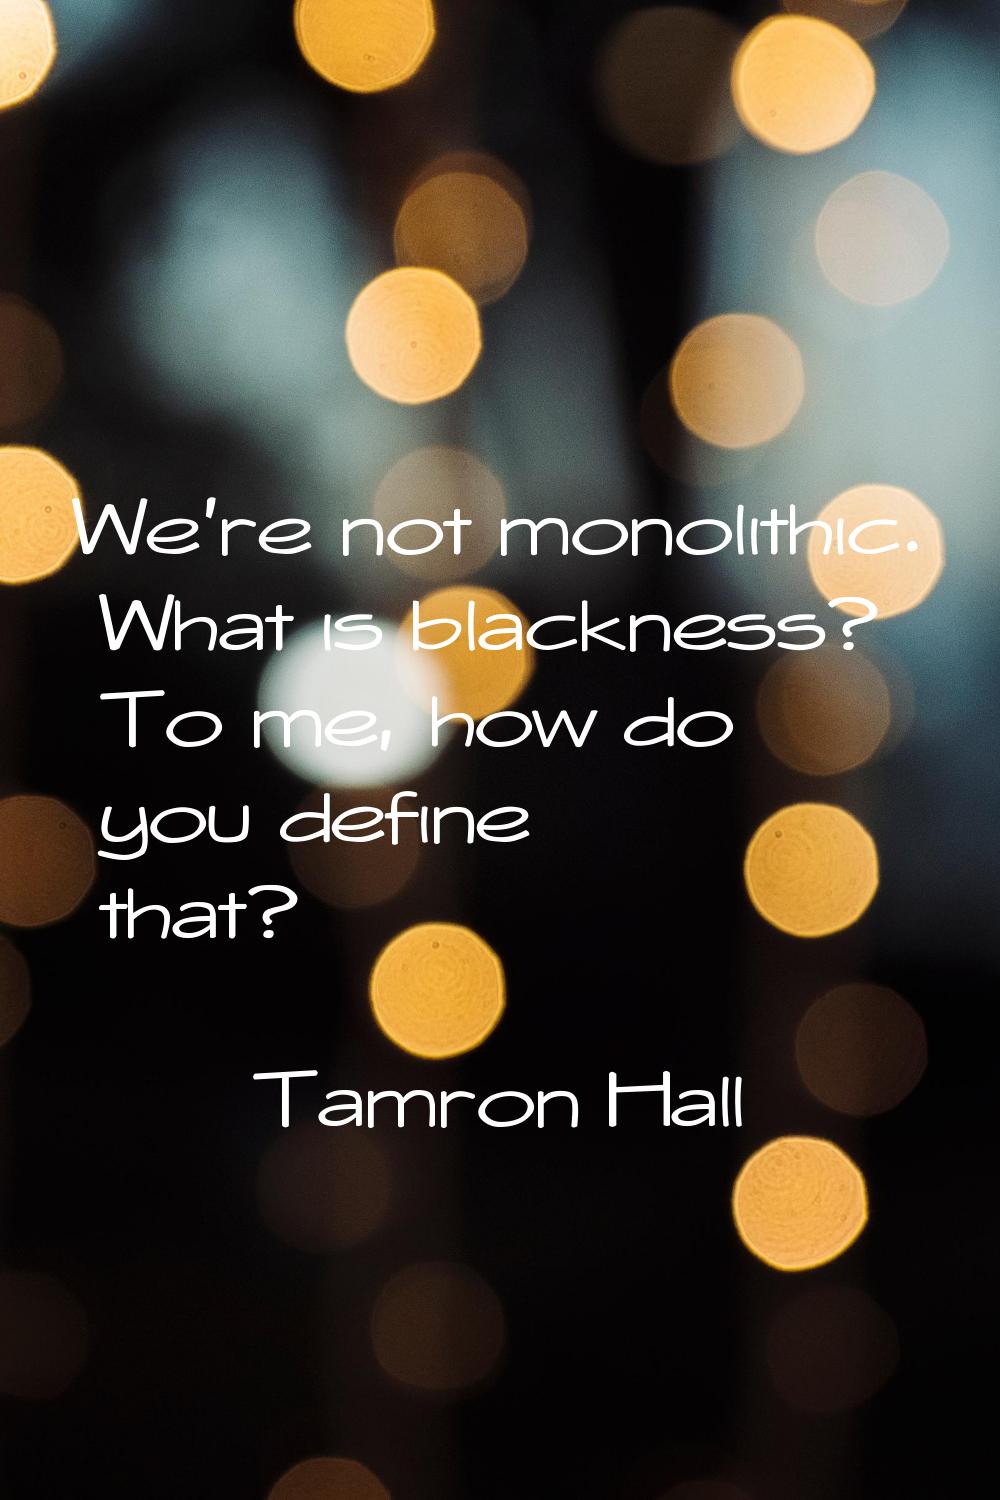 We're not monolithic. What is blackness? To me, how do you define that?